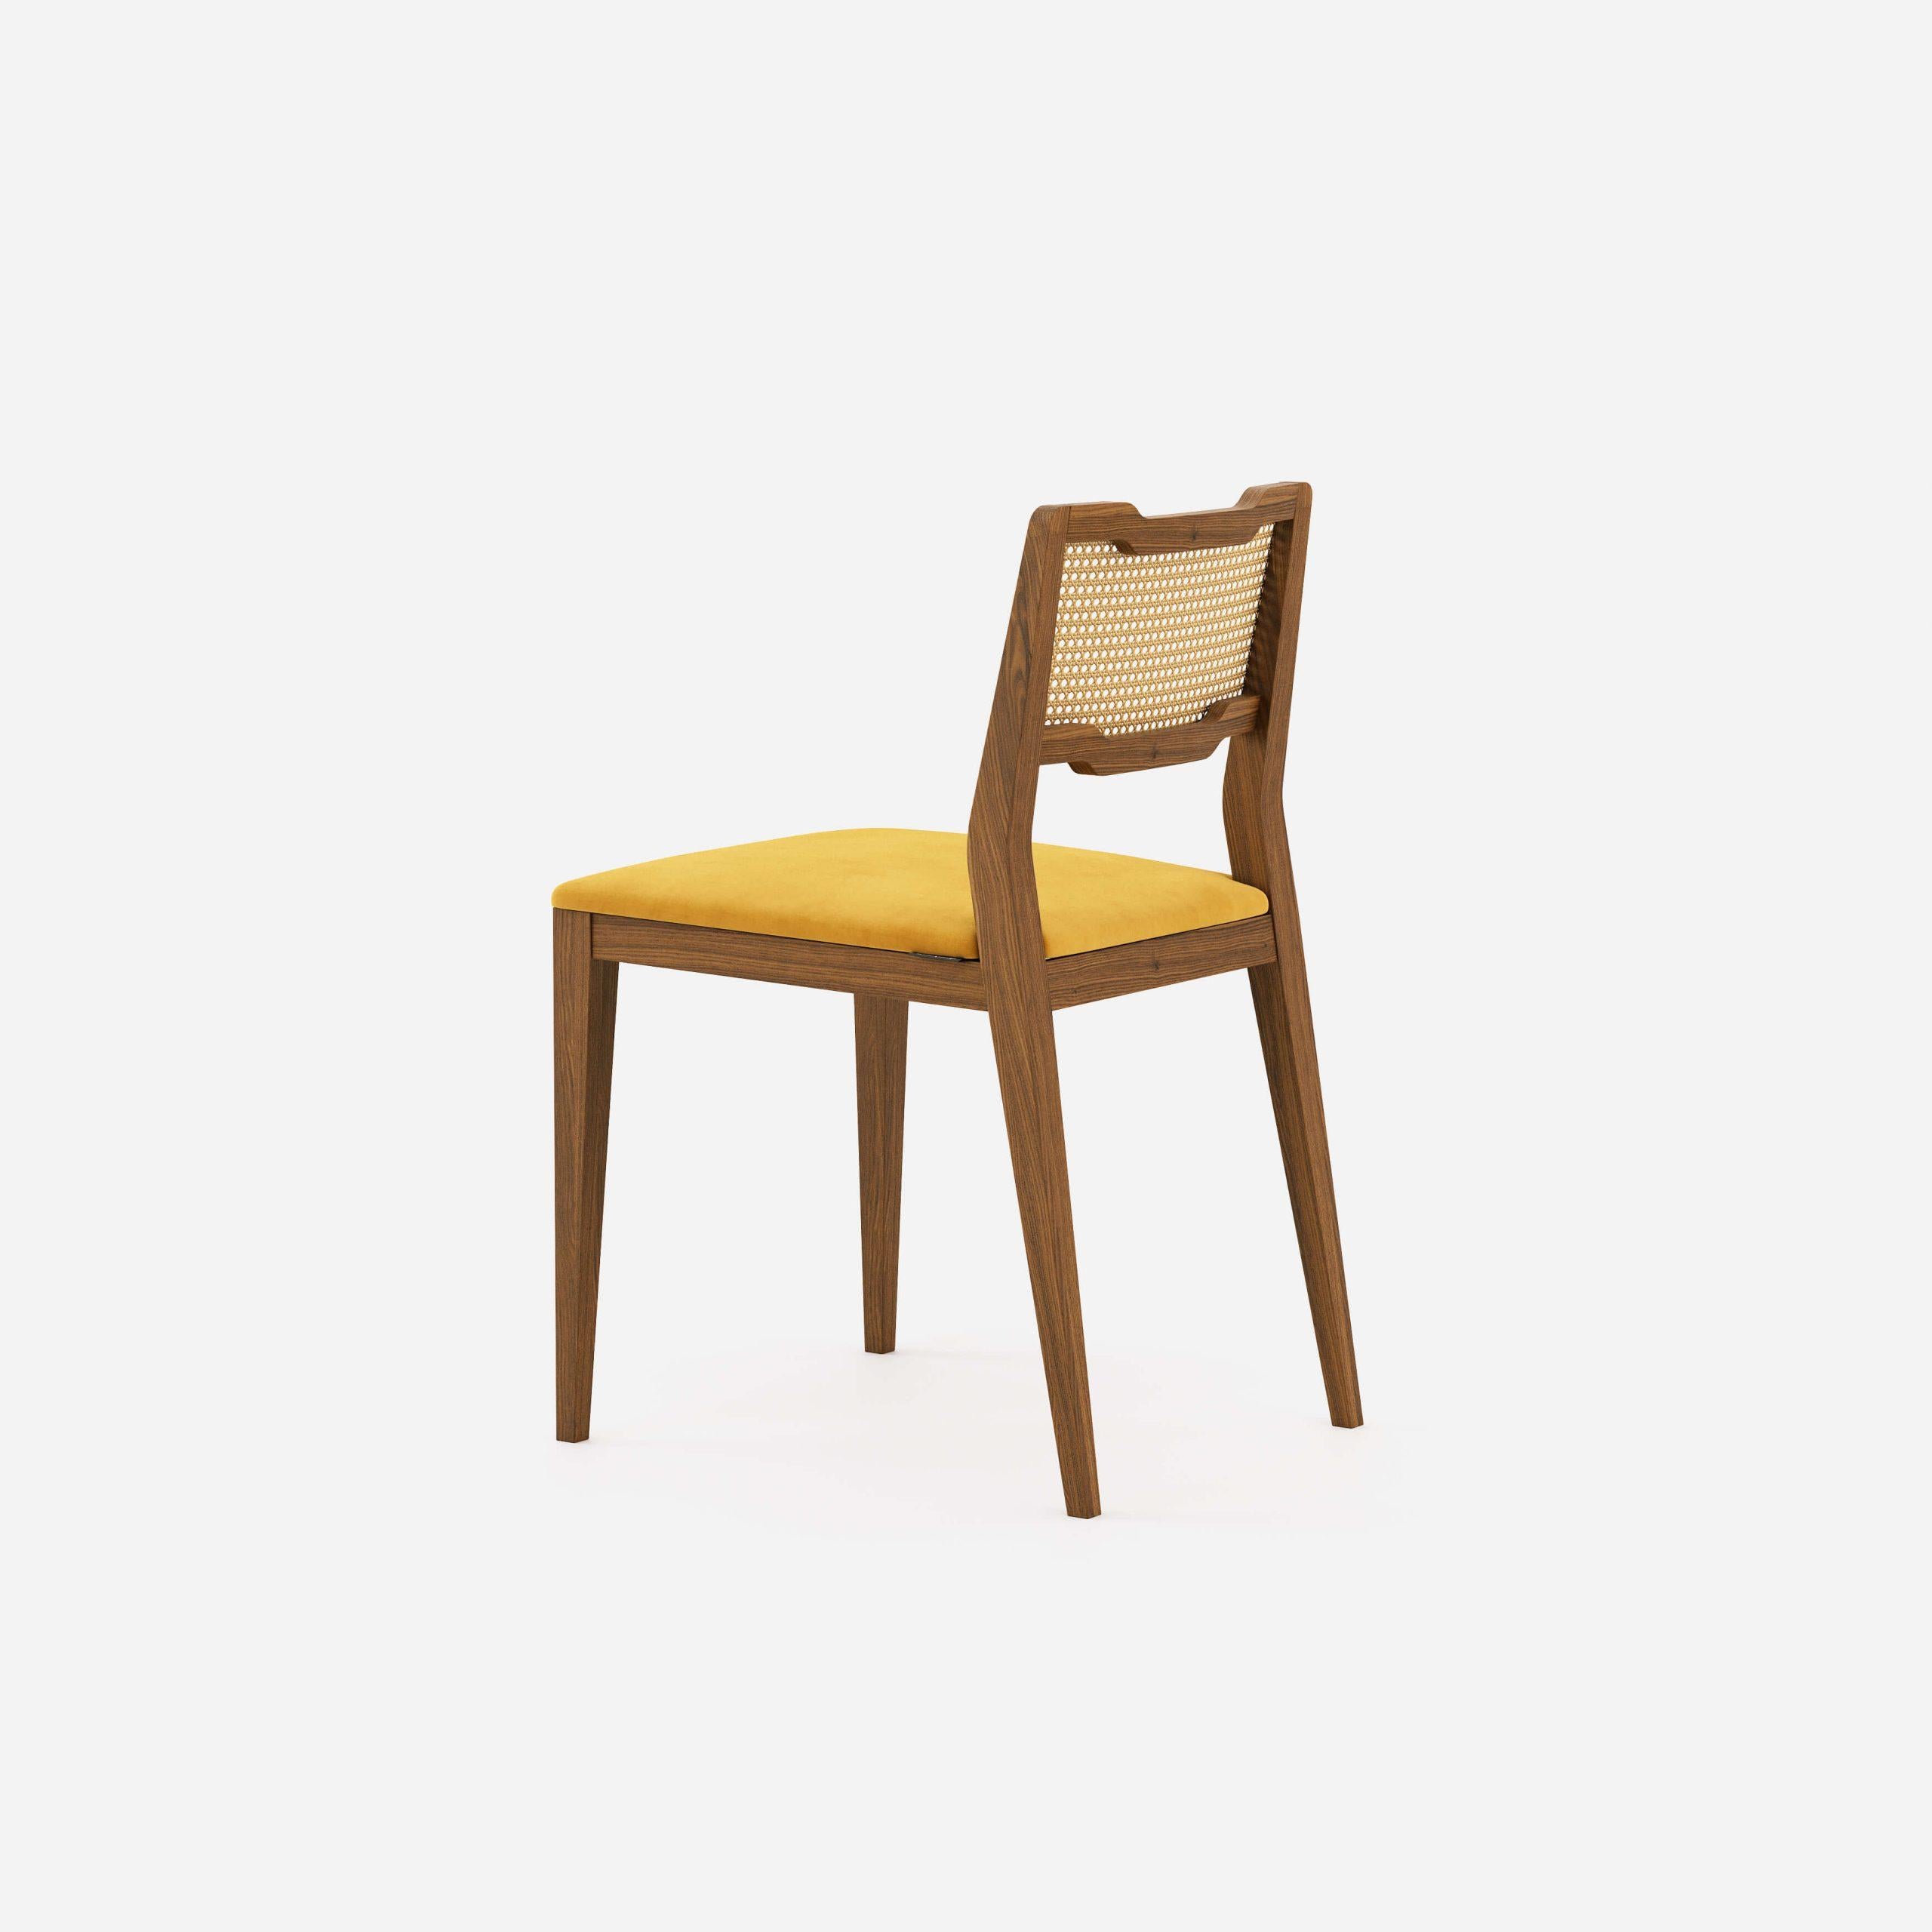 Velvet Contemporary Dining Chairs Crafted of Matte Walnut and Woven Cane Work For Sale